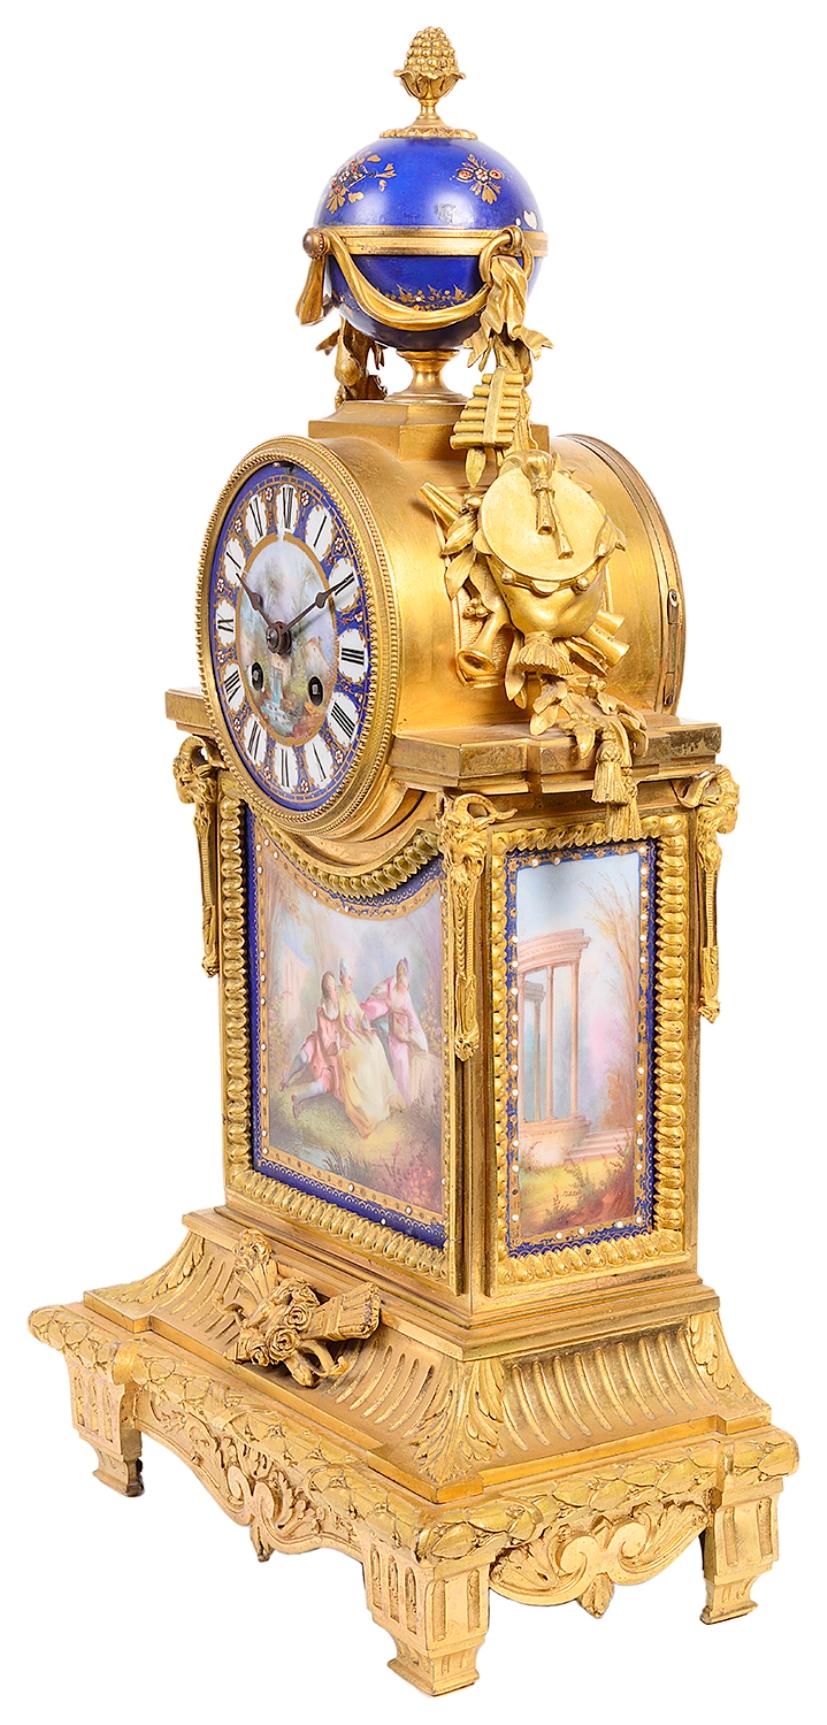 A good quality French 19th century gilded ormolu mantel clock with Sevres style porcelain plaques. Having a central porcelain globe with drapes and musical instruments hanging down either side of the eight day duration chiming clock, which has a